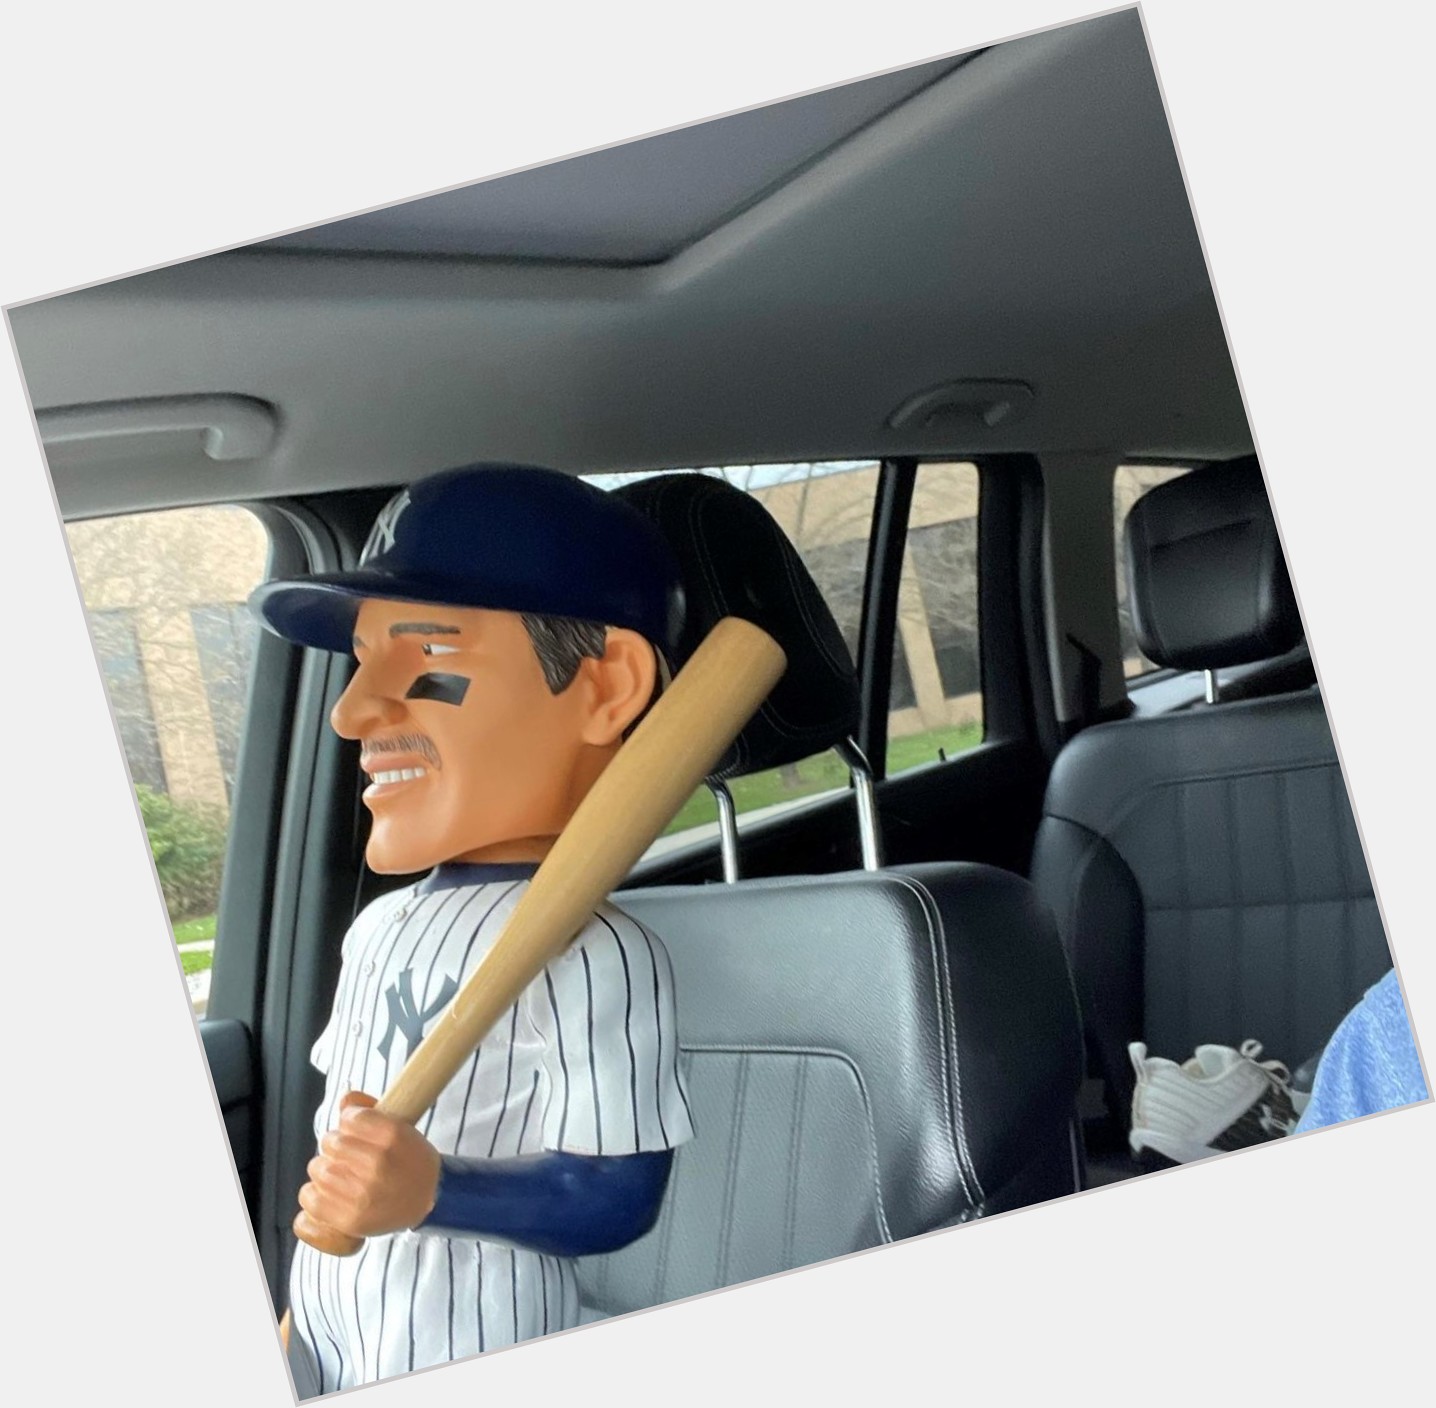 Going for a birthday ride. Happy Birthday Don Mattingly! 